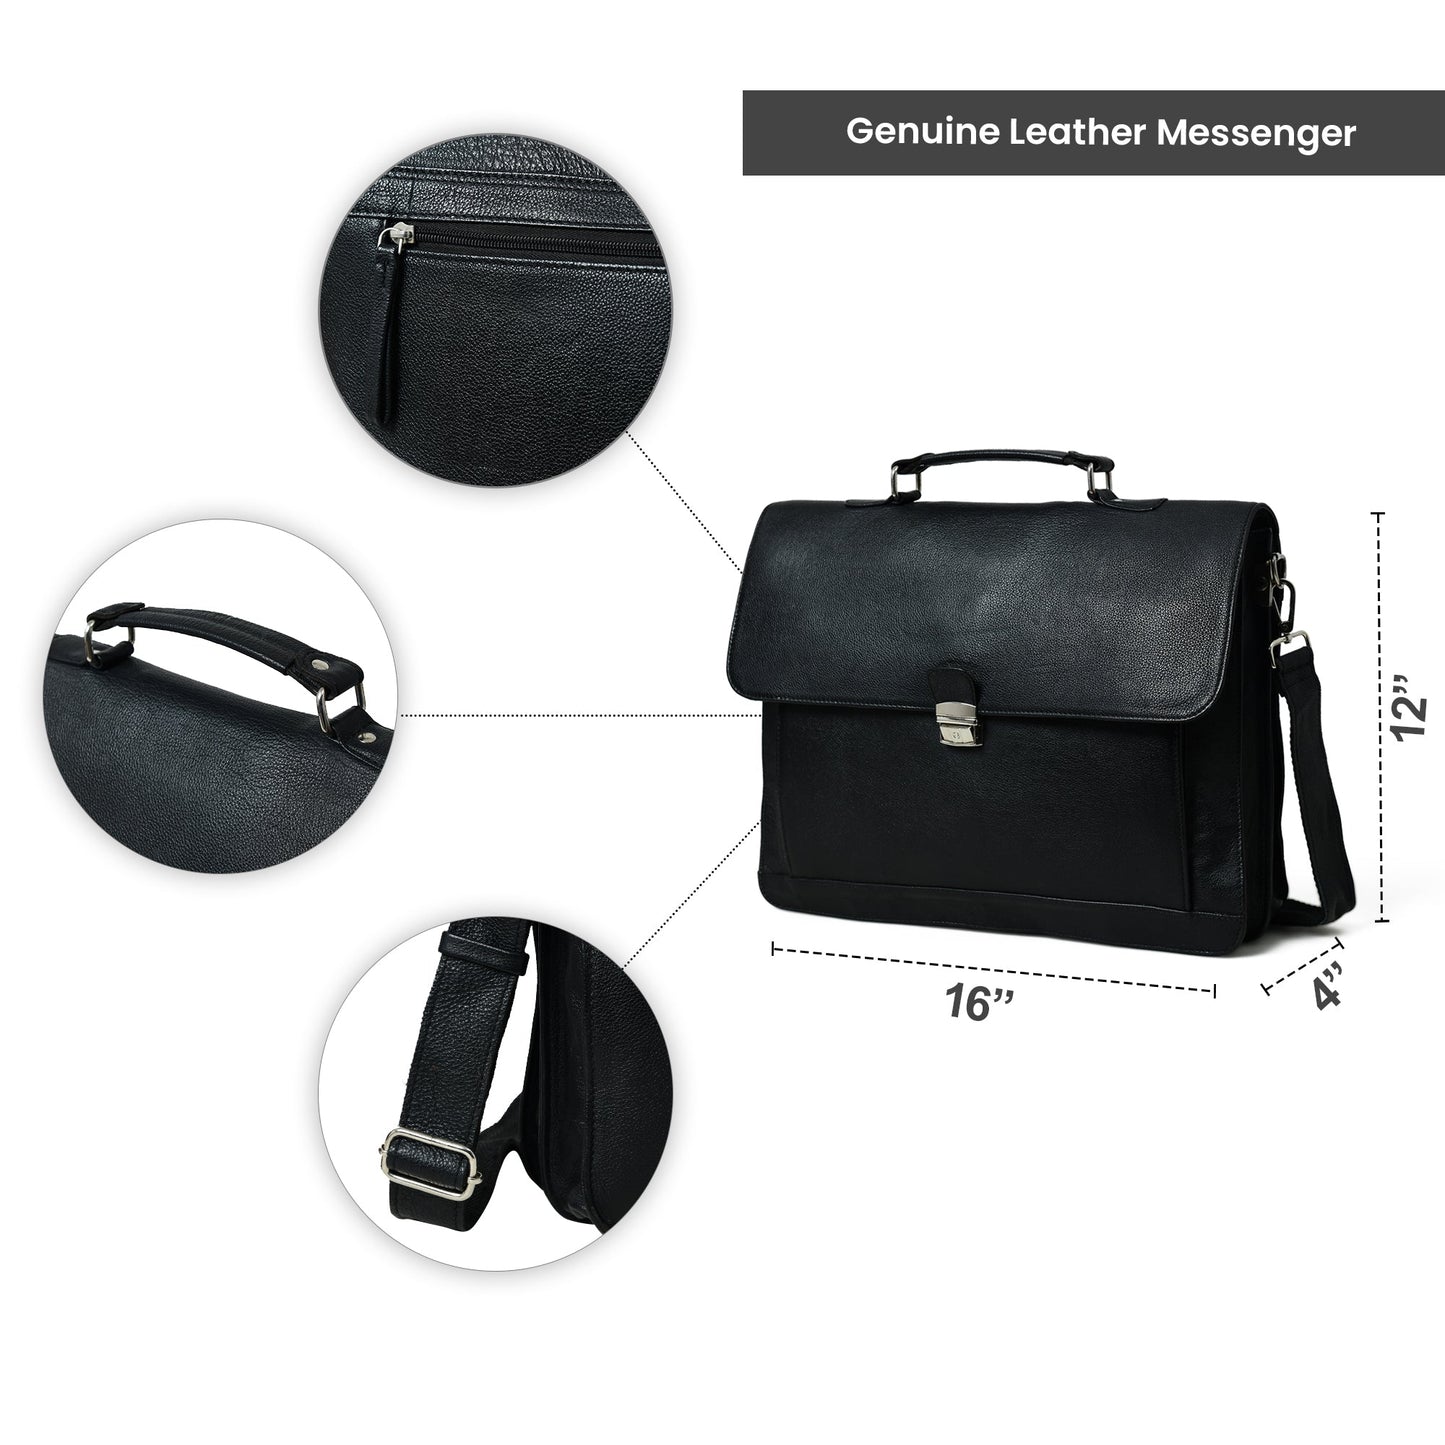 Business Attache Laptop Bag - Italian Finish - The Tool Store